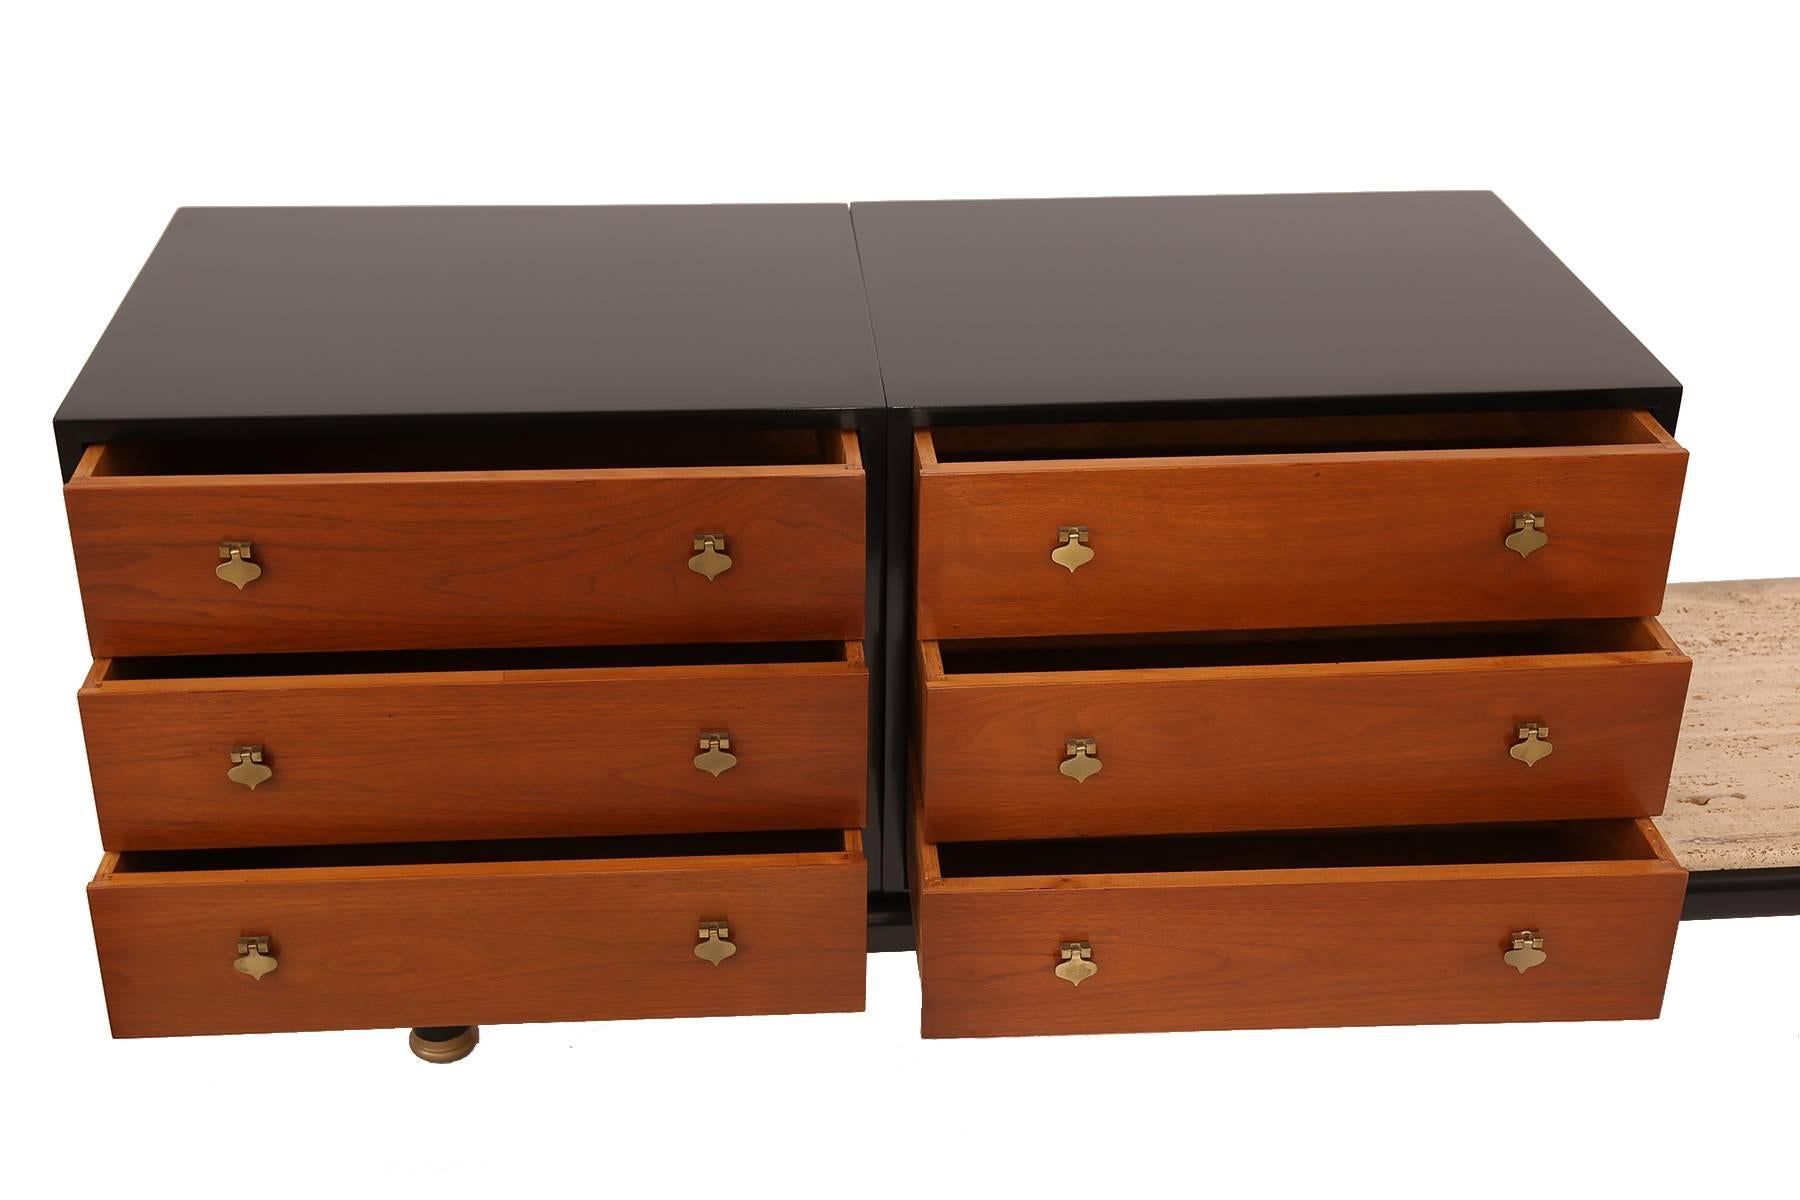 Renzo Rutili for Johnson Furniture Company chest of drawers on a bench platform, circa early 1960s. This stunning example has an ebonized frame, inset travertine table top and six mahogany drawers with patinated brass shamrock hardware.